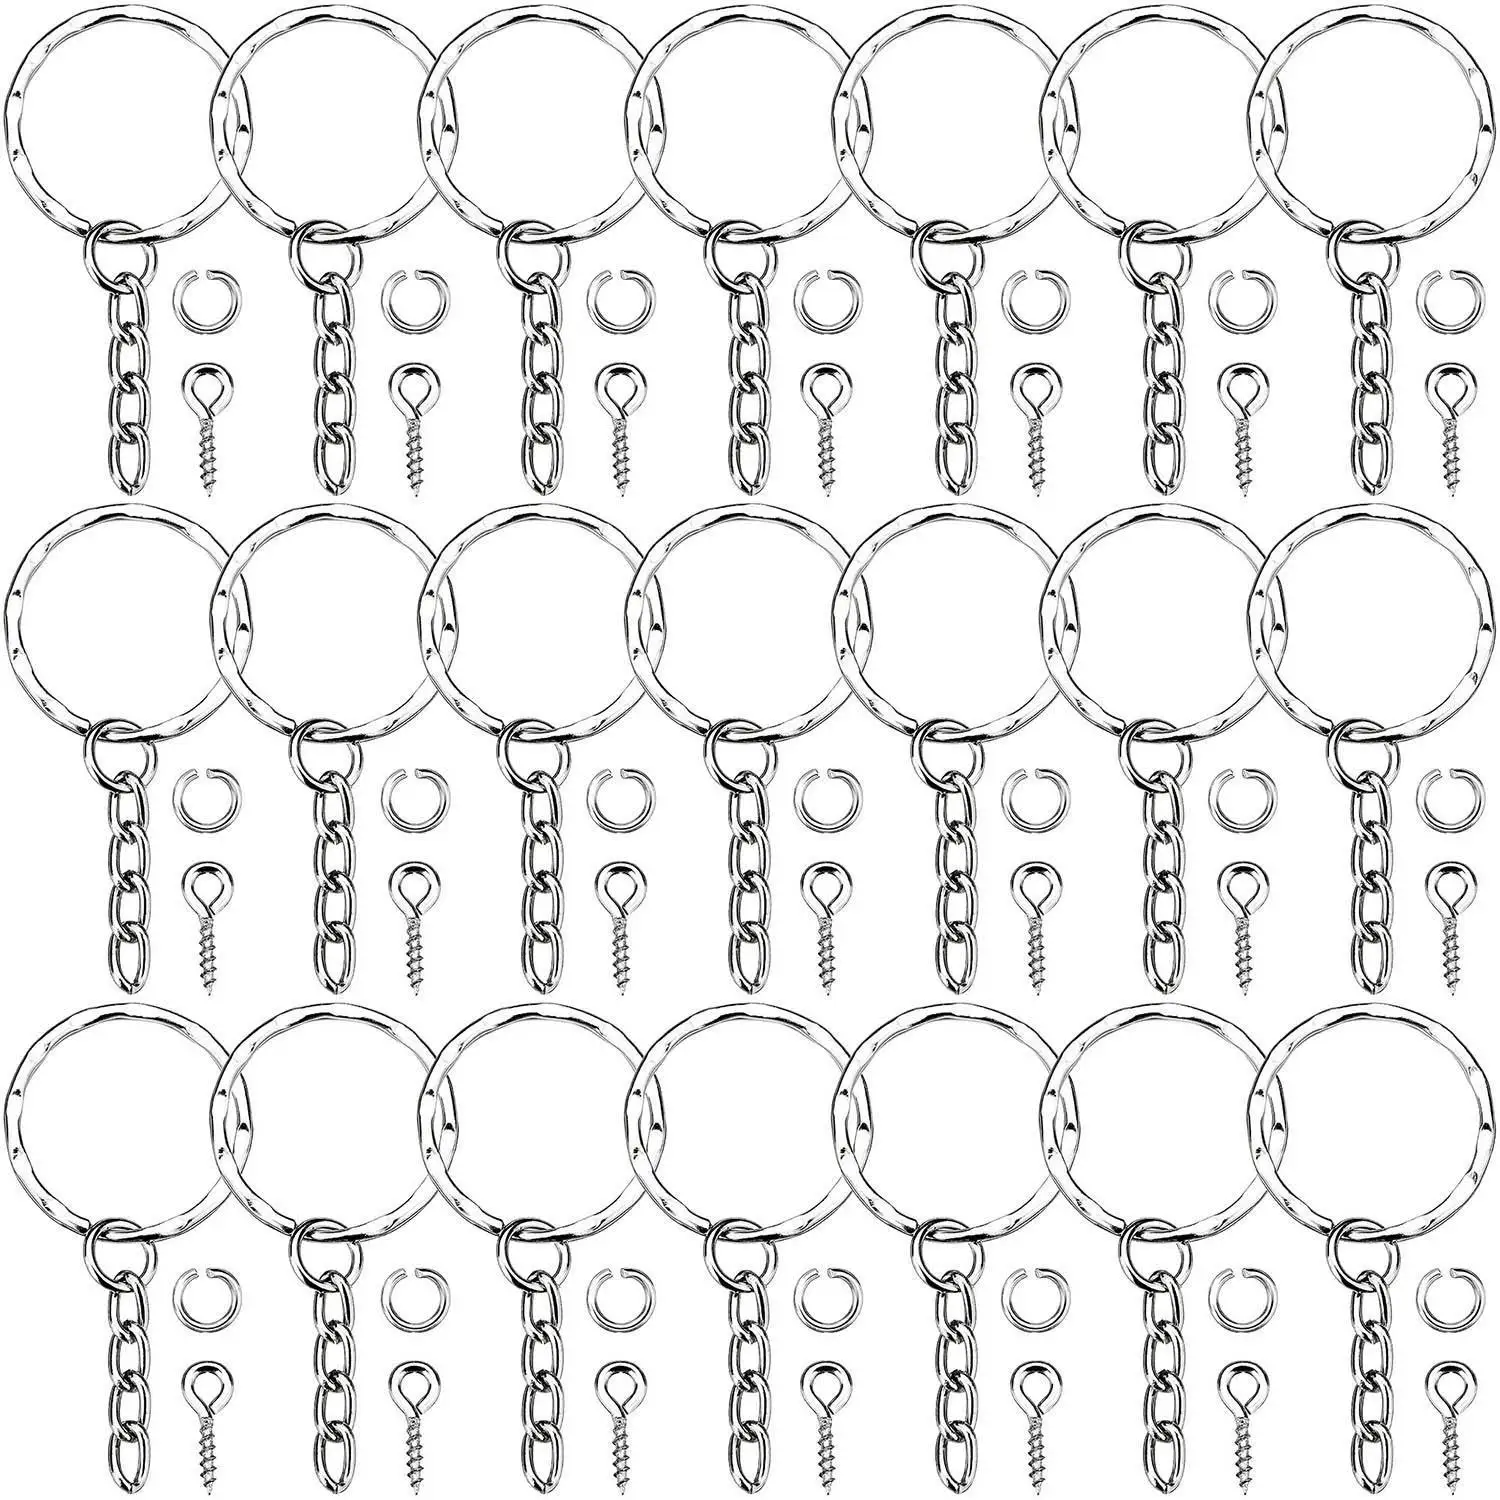 

63pcs Keychain Rings for Crafts Key Chain Rings with Chain Open Jump Rings Screw Eye Pins Crafts and Keychain Making Supplies